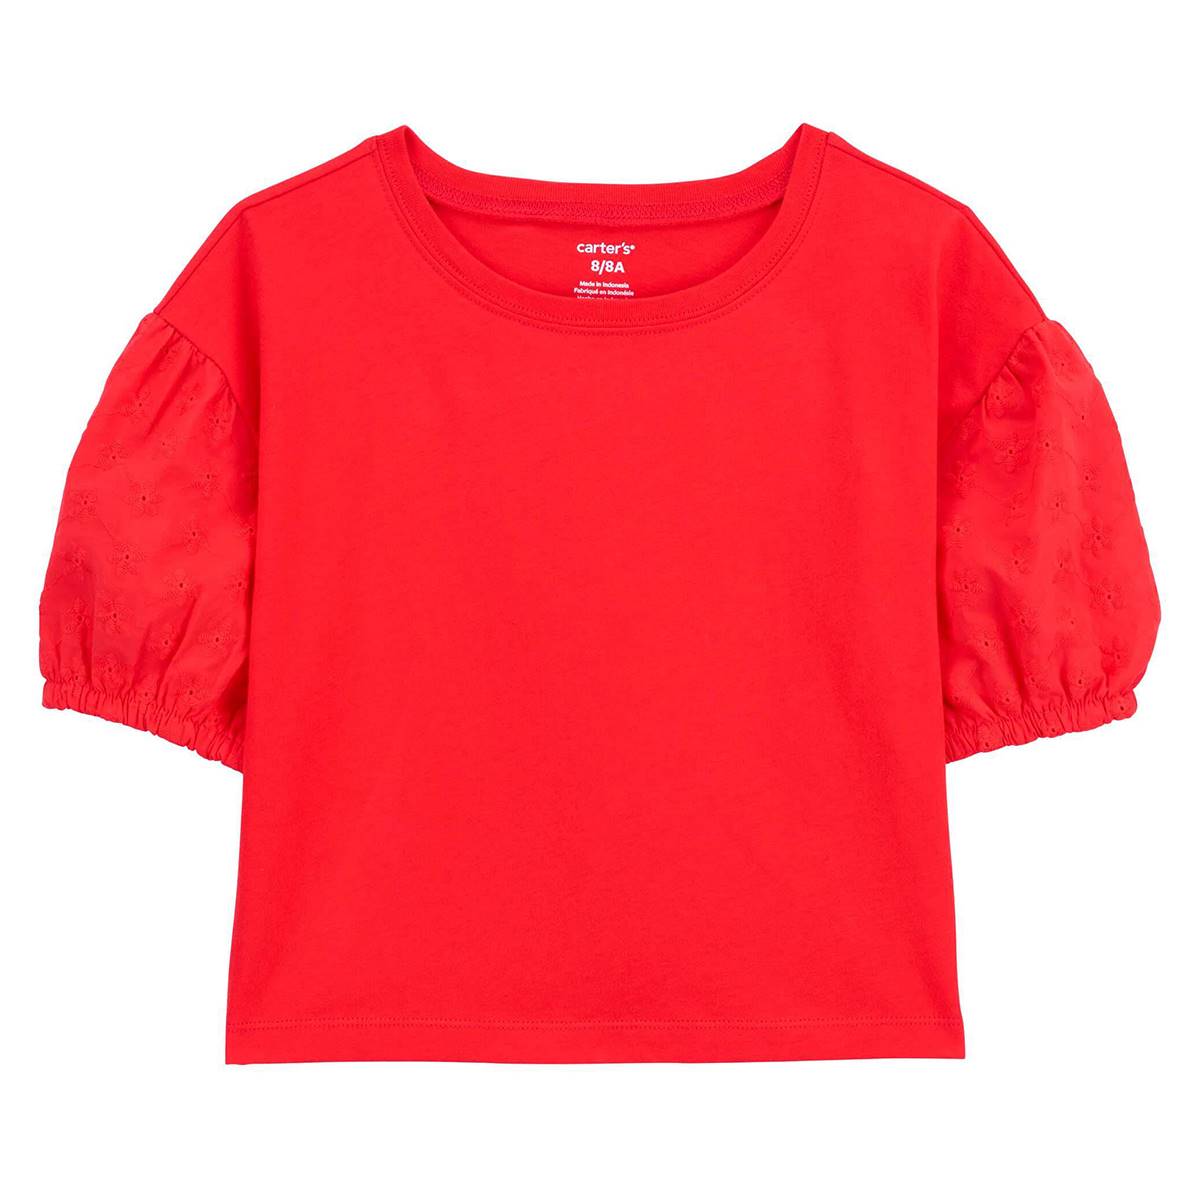 Girls Carter's(R) Red Solid Eyelet Sleeves Top